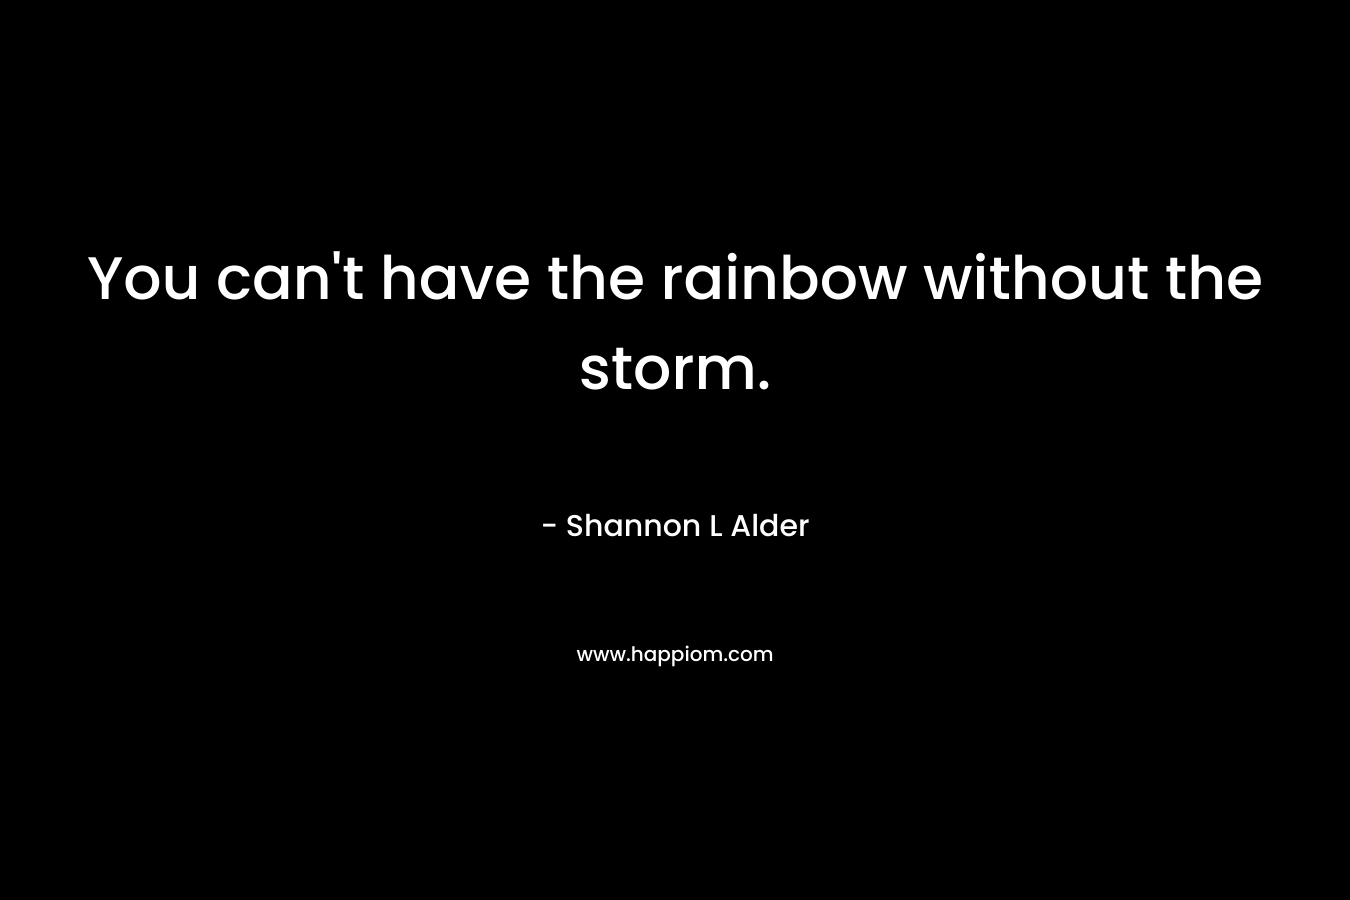 You can’t have the rainbow without the storm. – Shannon L Alder